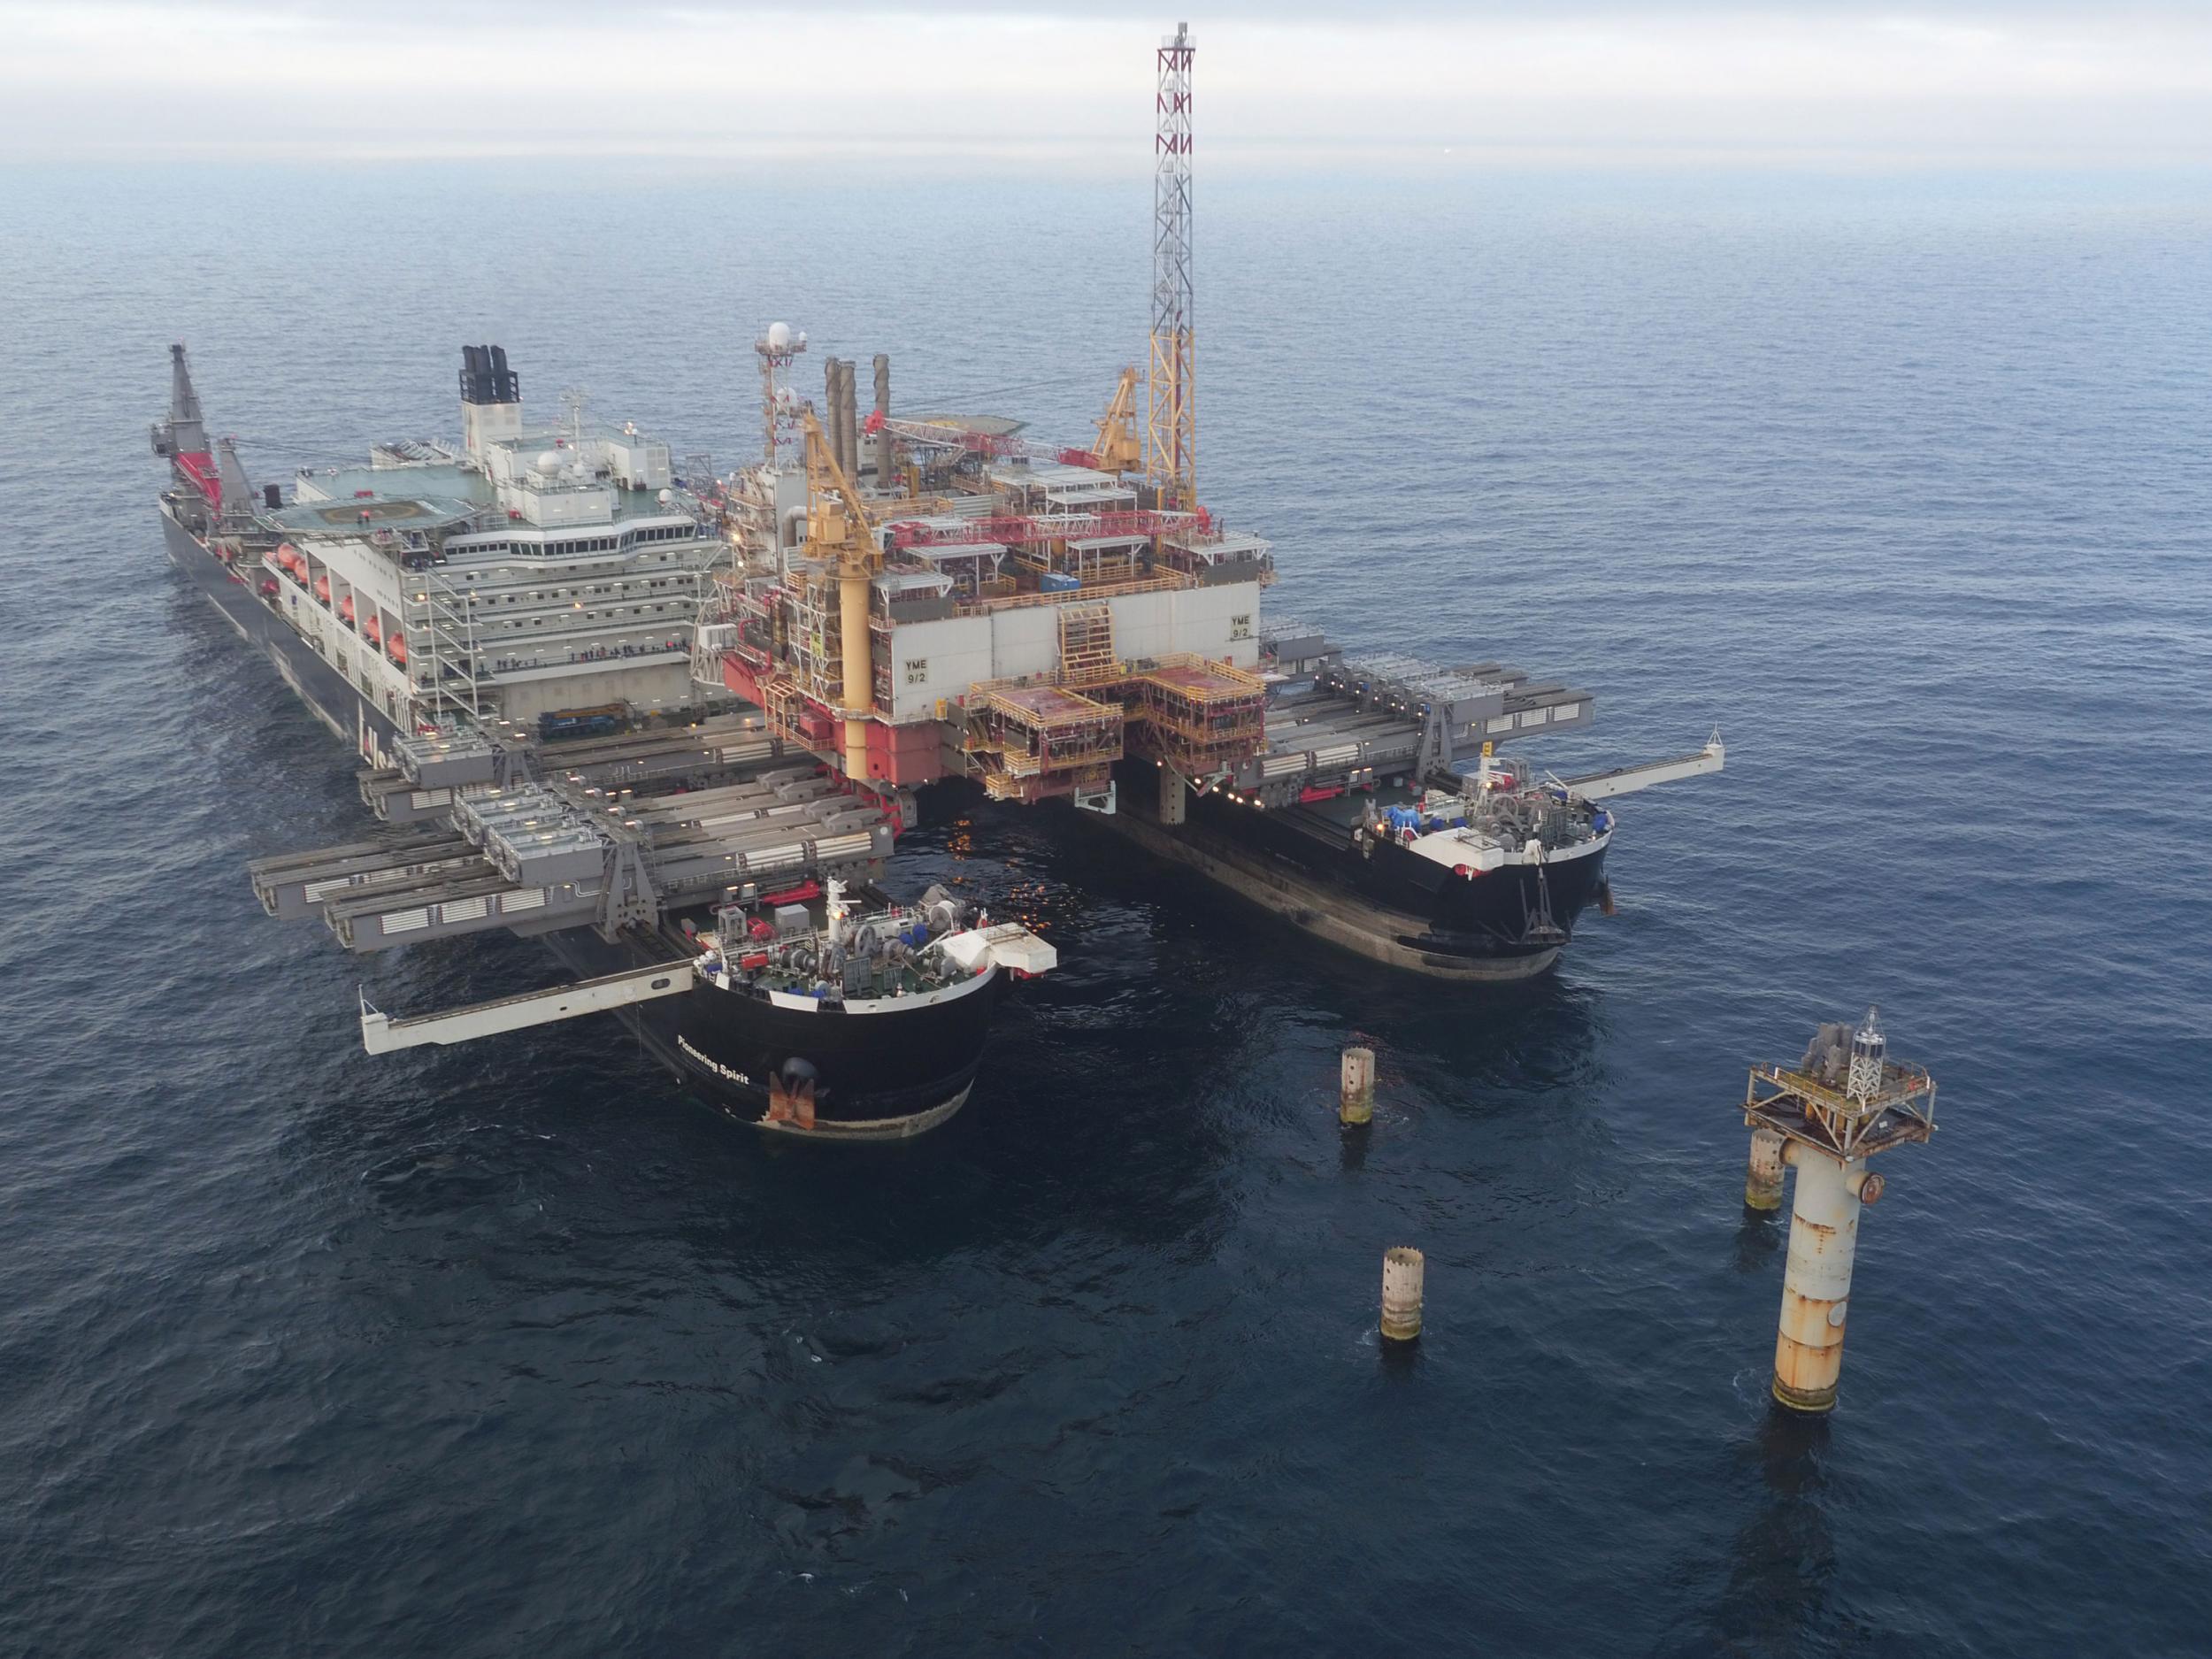 The Pioneering Spirit, the largest ship ever built, shortly after it removed the Norweigan Yme oil rig's topside from its concrete legs. It will soon carry out a similar operation on the much larger, British-owned platform.